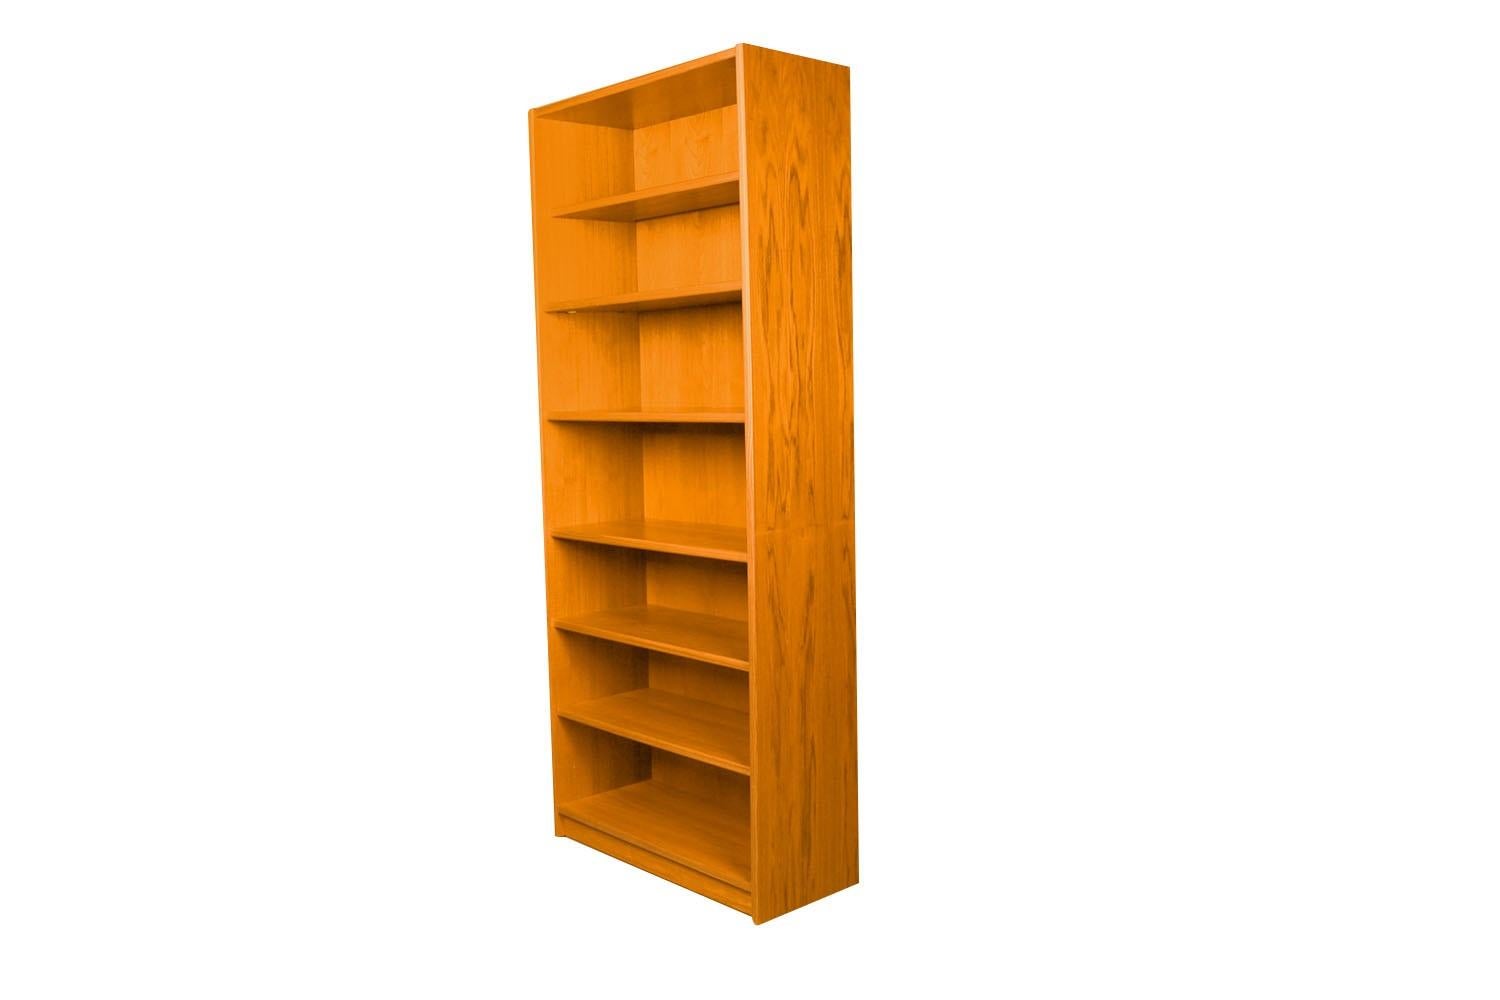 An exceptional teak tall bookcase made in Denmark.  Gorgeous Mid-Century Modern Teak bookcase / tall bookshelf unit. Beautiful, minimalist, clean, straight lines. Features five and one stationary providing ample storage space. The top shelf is 11